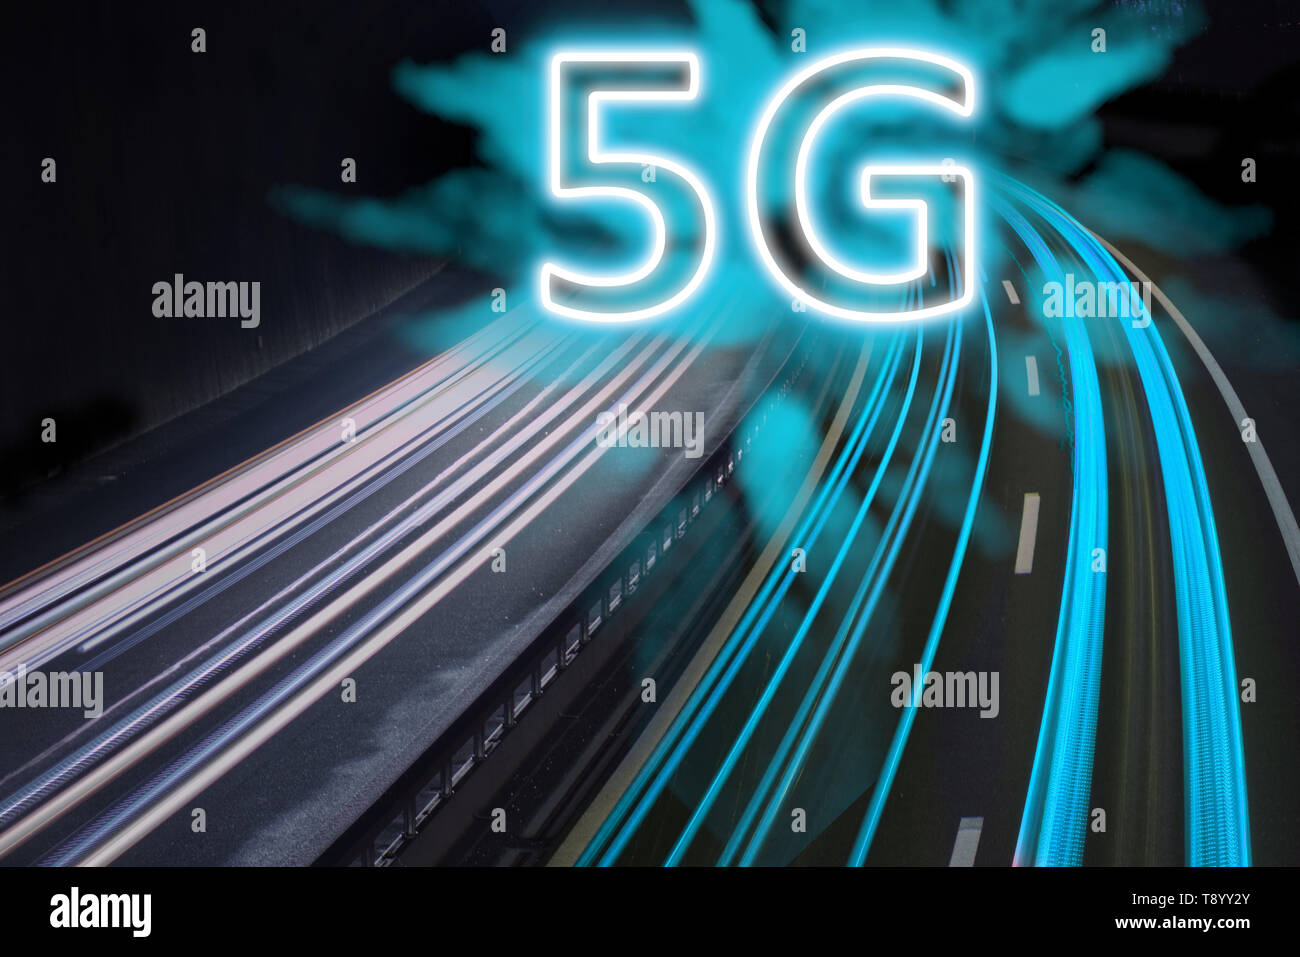 5G network wireless systems and internet shown with blue trail lights on highway. Stock Photo